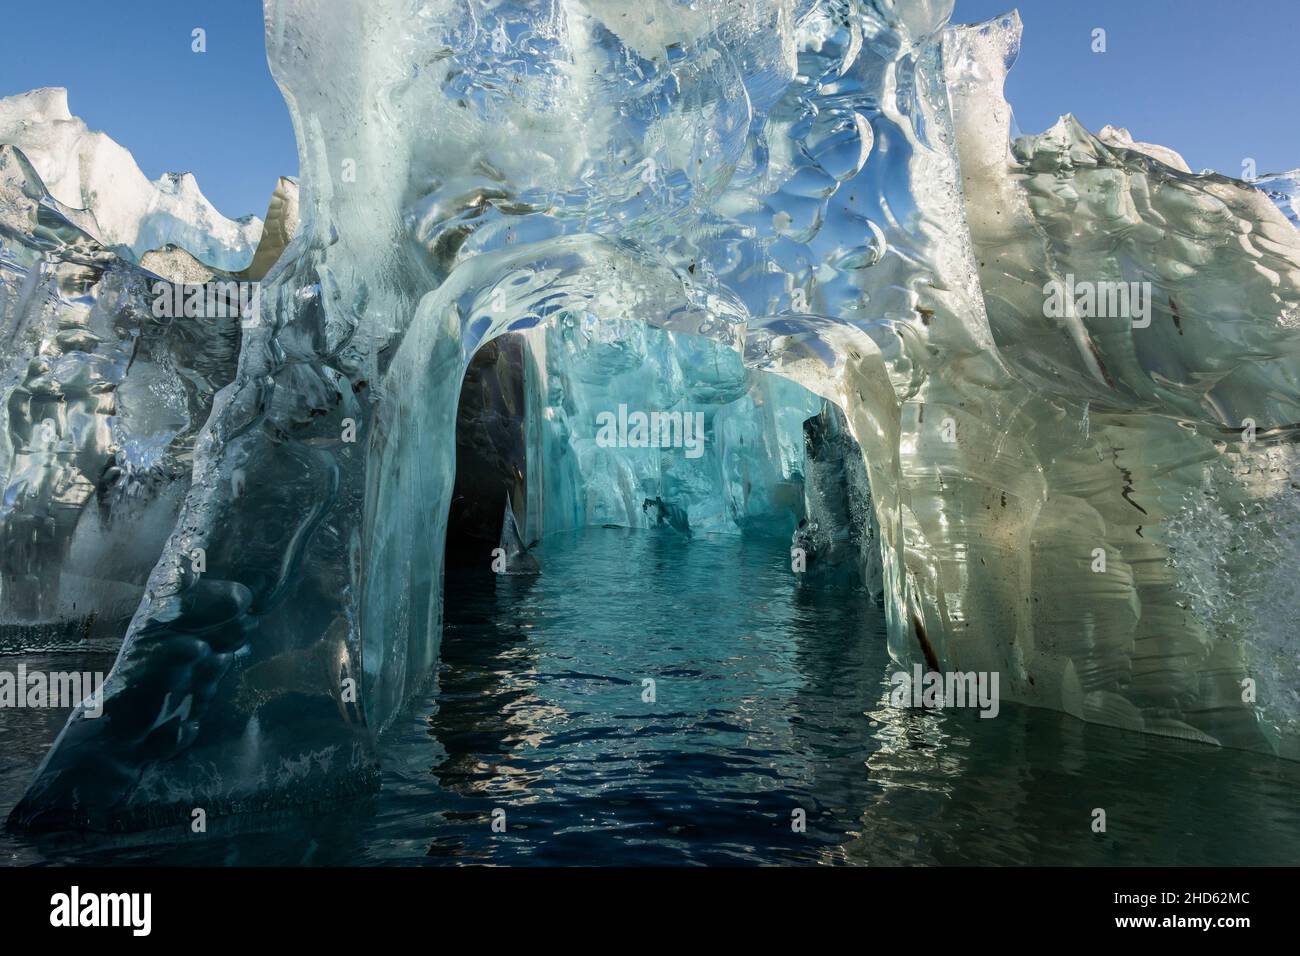 Looking into an ice cave in an old crystalline blue iceberg, Rodefjord, Scorseby Sund, East Greenland Stock Photo